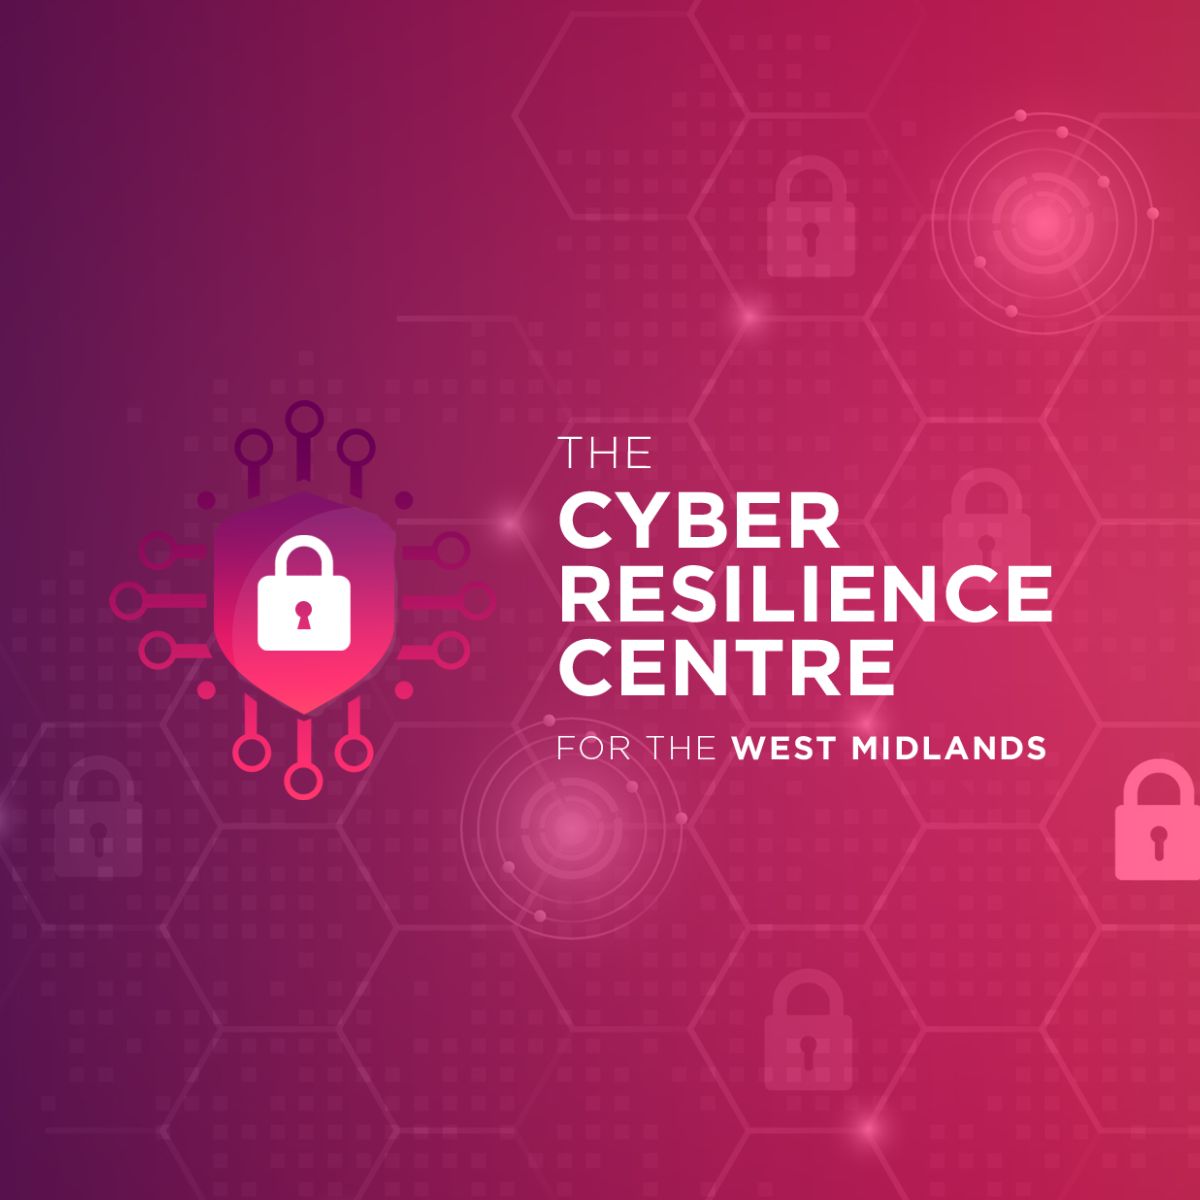 The 9th annual Cyber Security Breaches Survey shows 50% of UK businesses and 32% of charities were targeted by cyber attacks last year. Phishing was the top threat, impacting 84% of businesses. Sign up for our FREE membership to safeguard your business: wmcrc.co.uk/membership